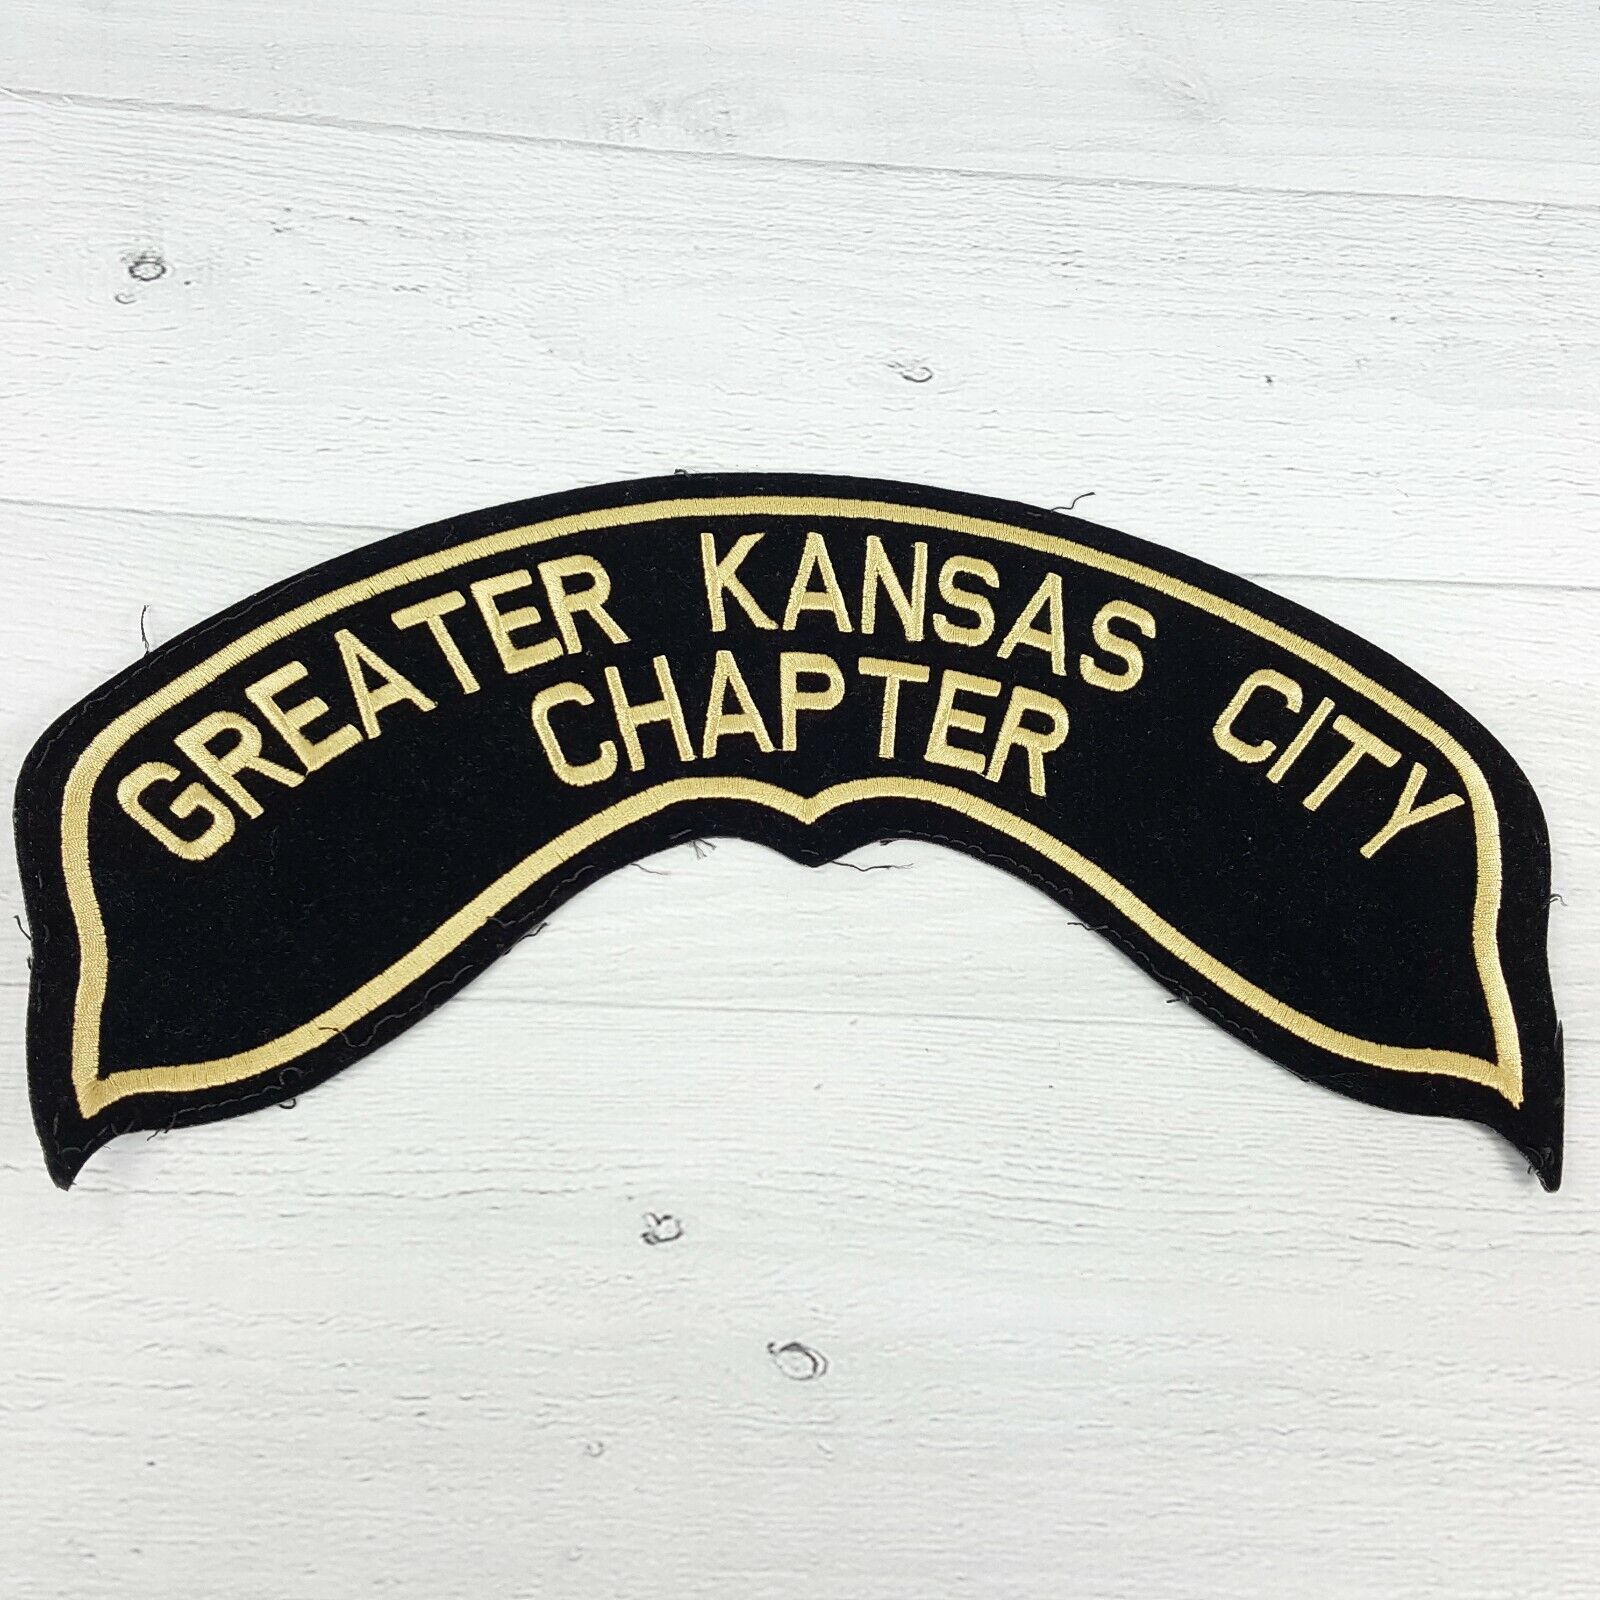 Greater Kansas City Chapter Motorcycle Rider Club Group Embroidered Jacket Patch